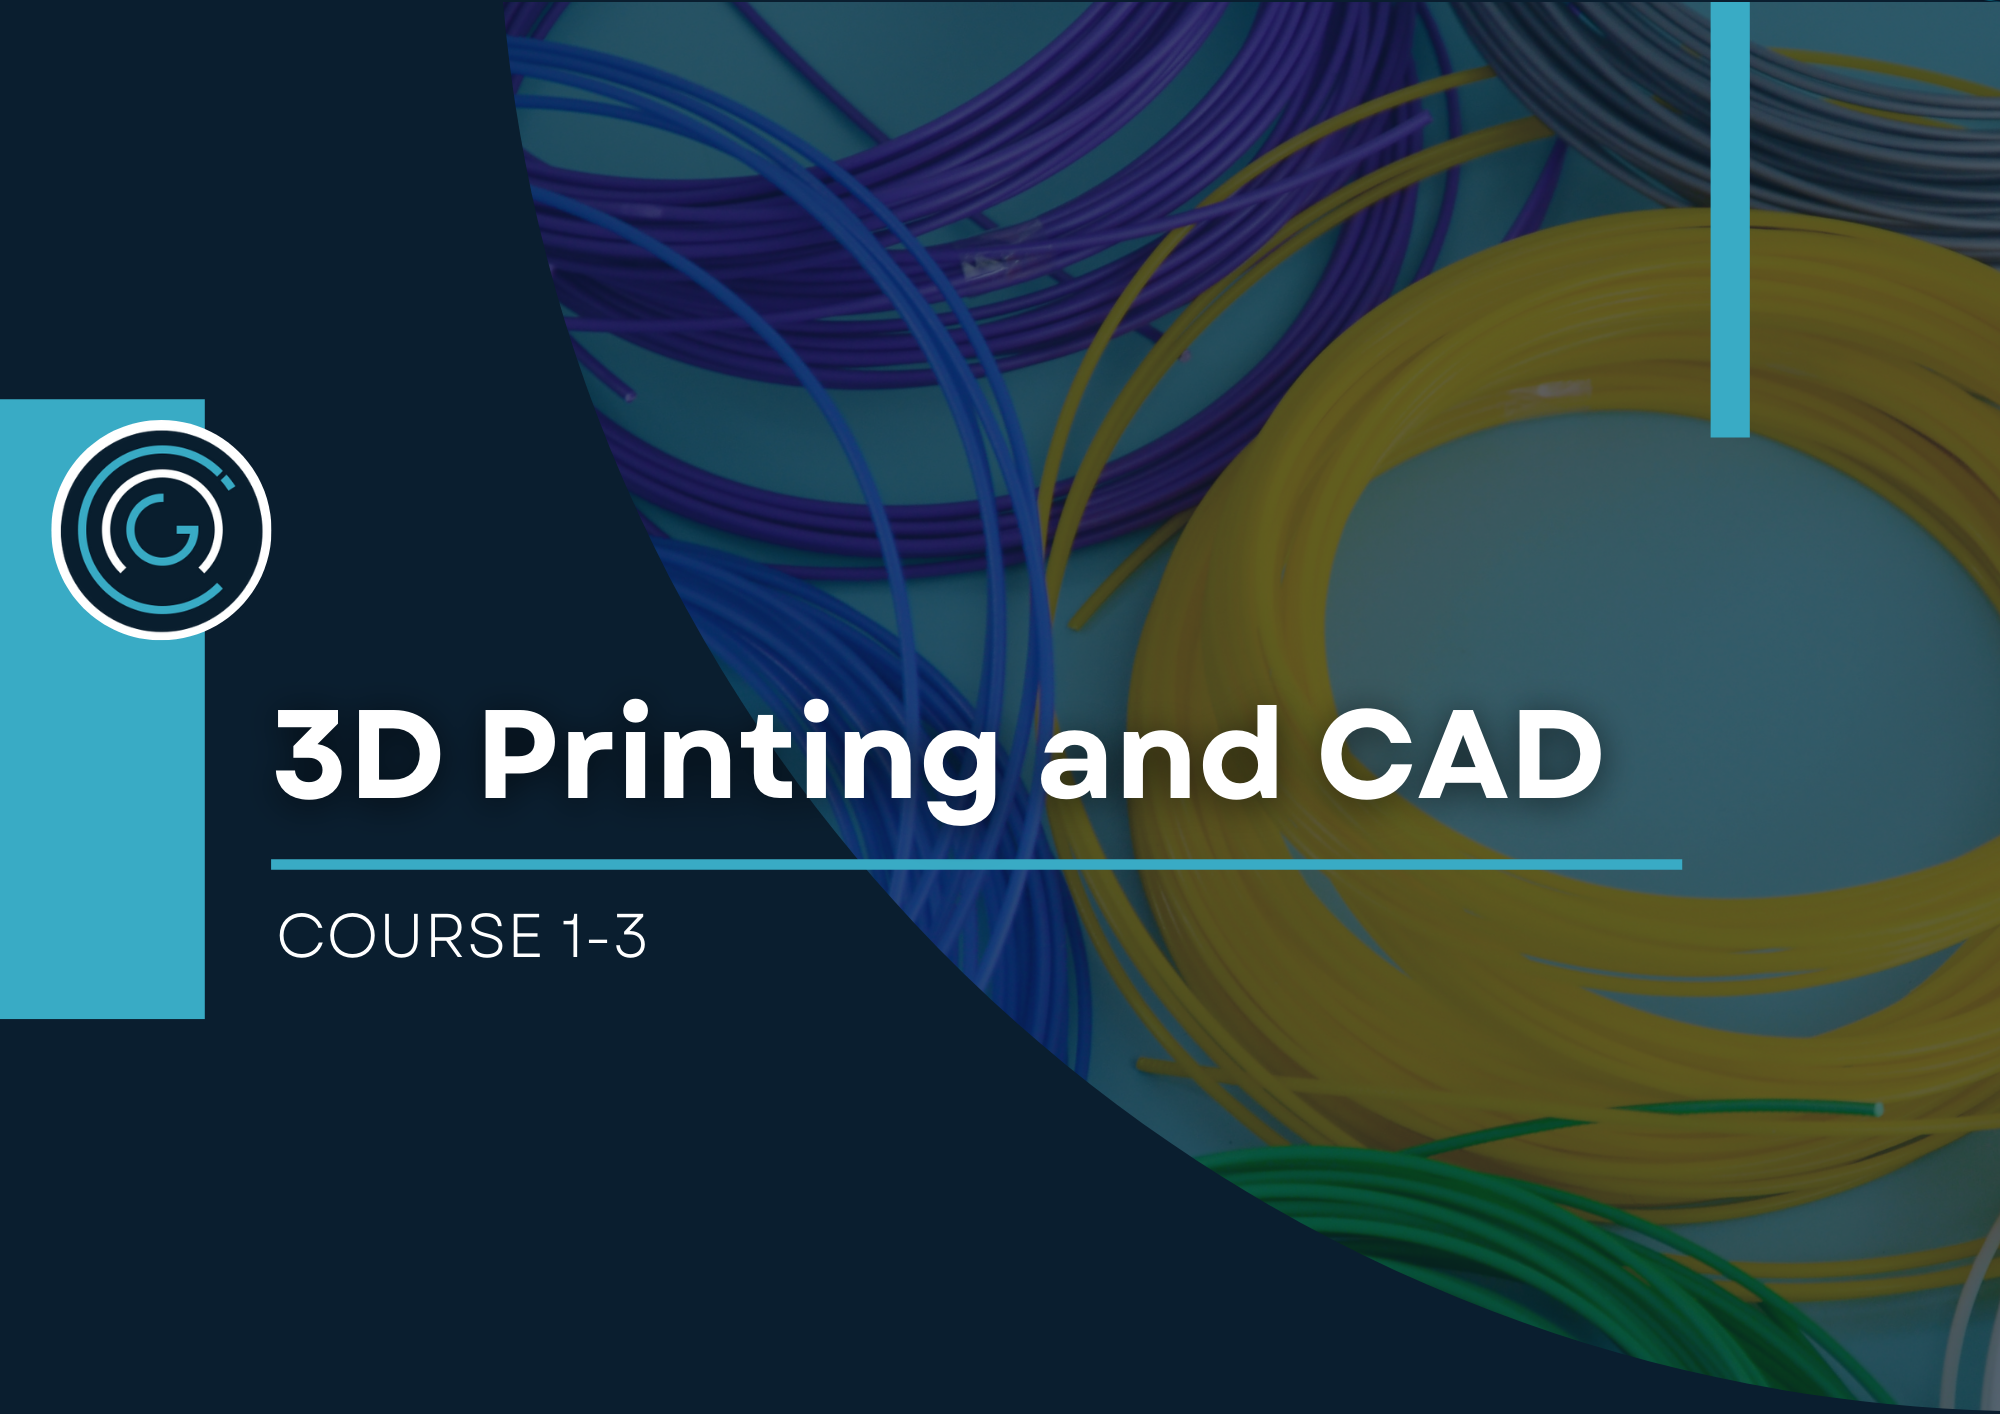 3D Printing and CAD